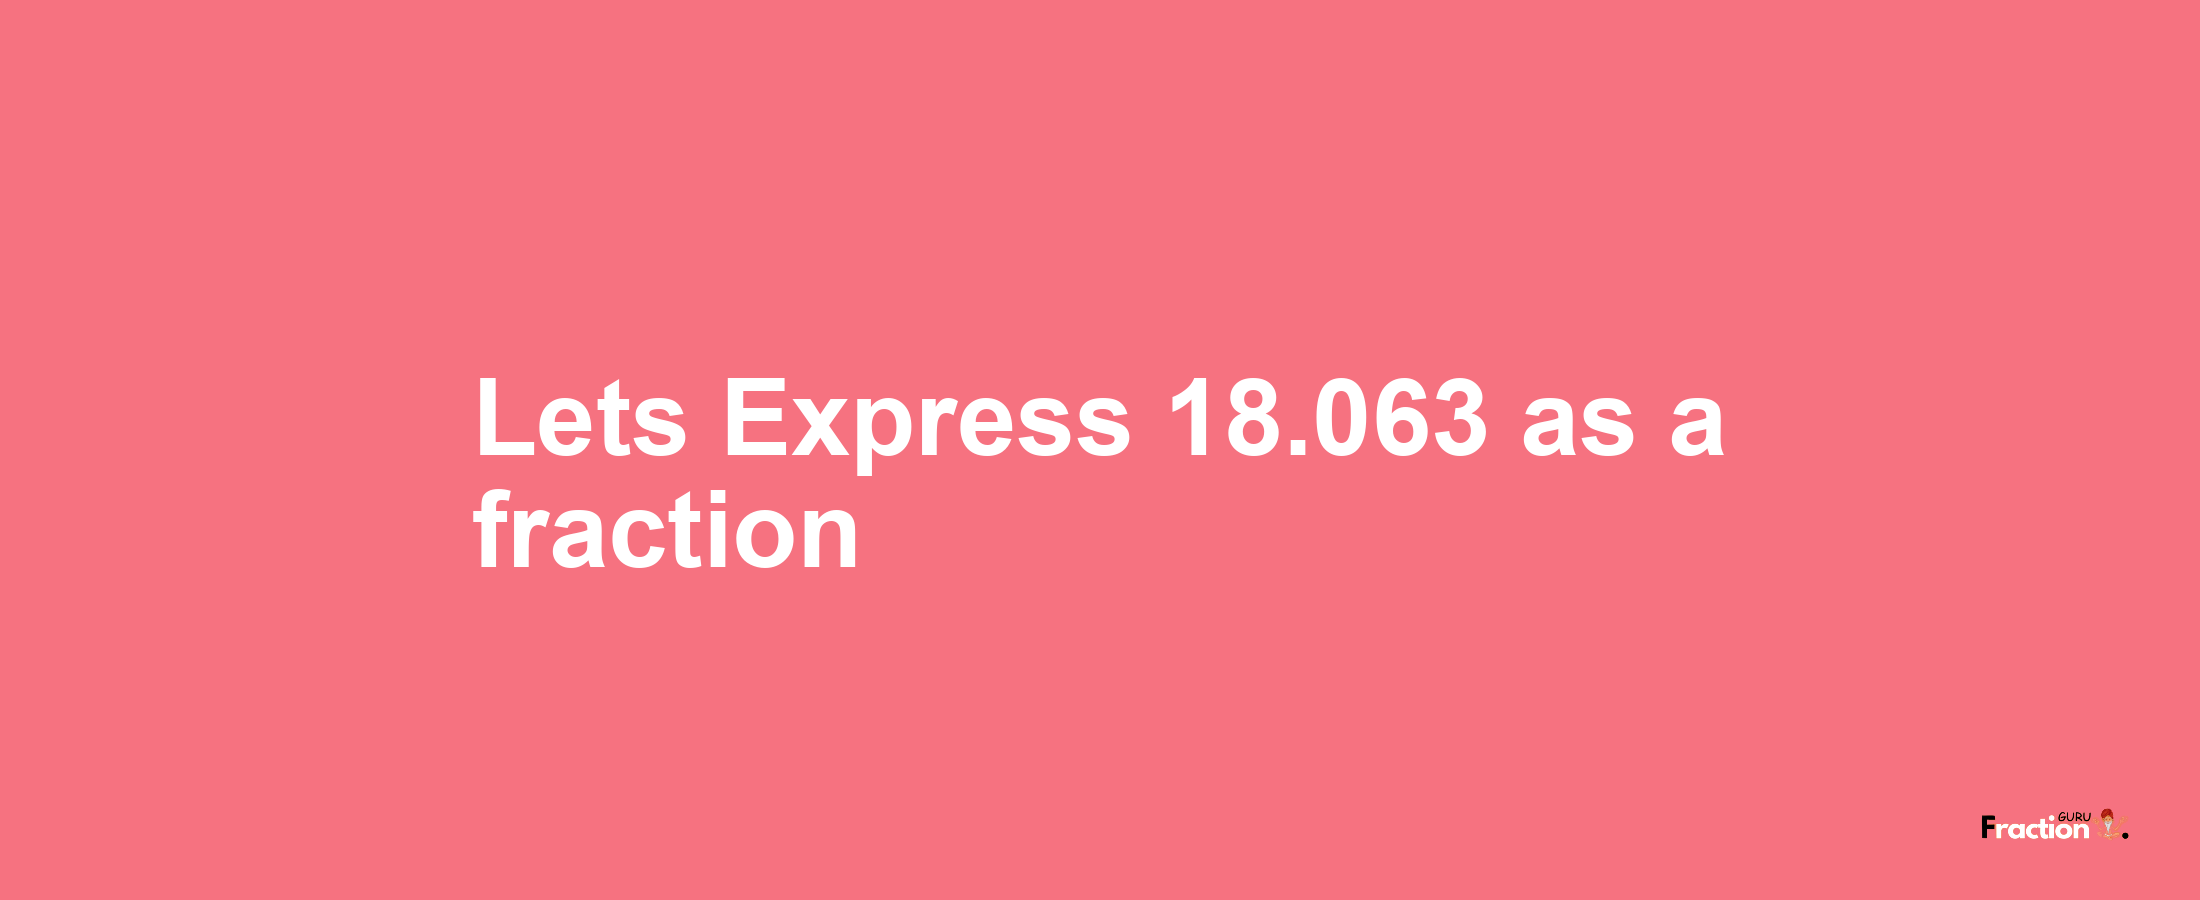 Lets Express 18.063 as afraction